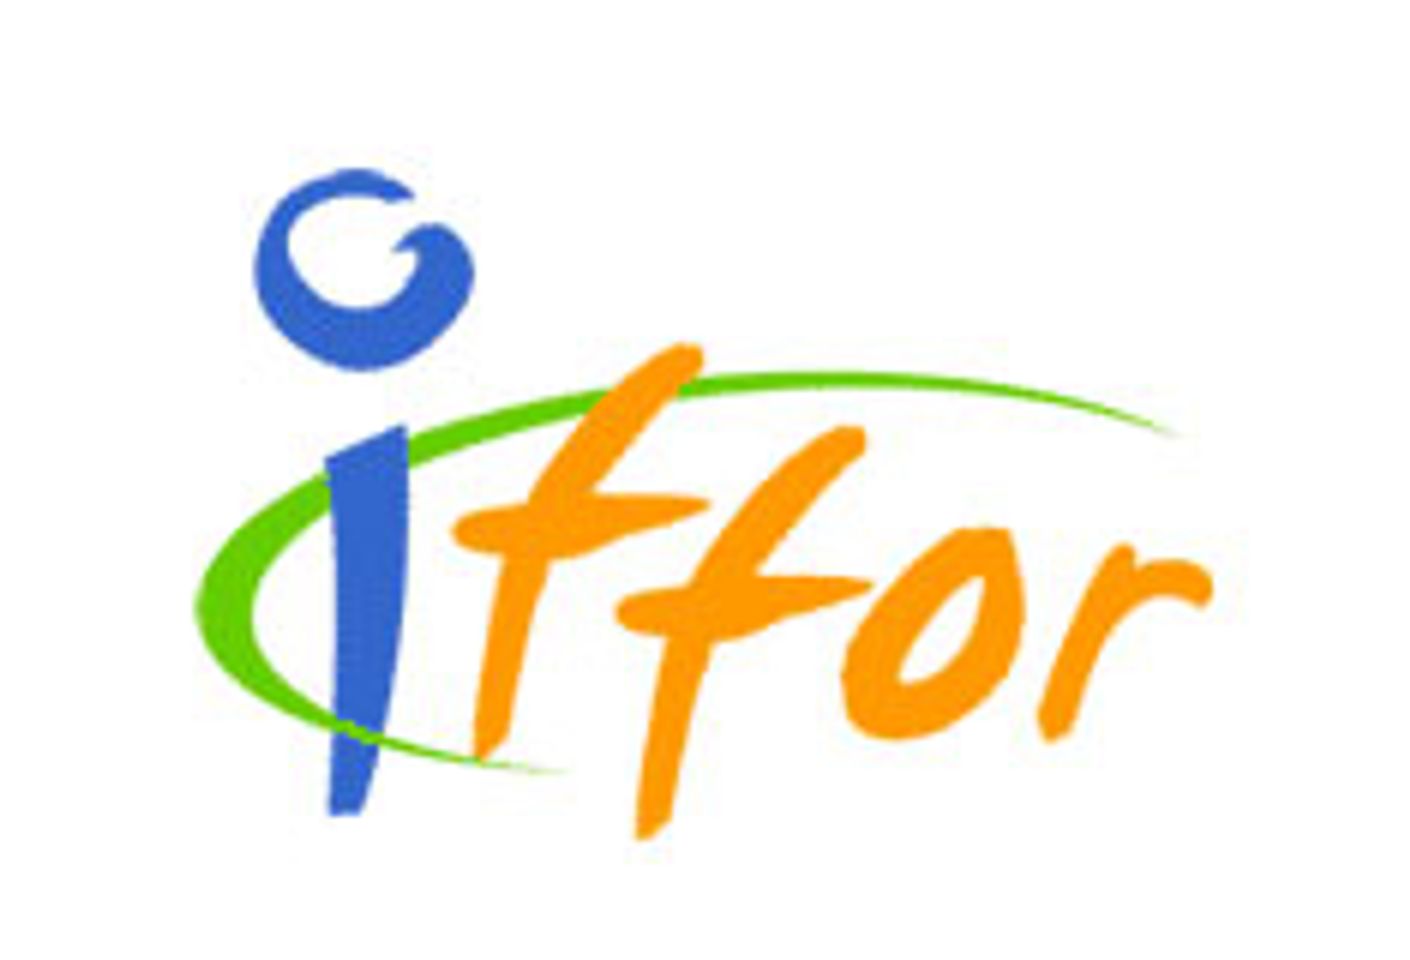 IFFOR Announces New Board Chair as Stuart Lawley Steps Down